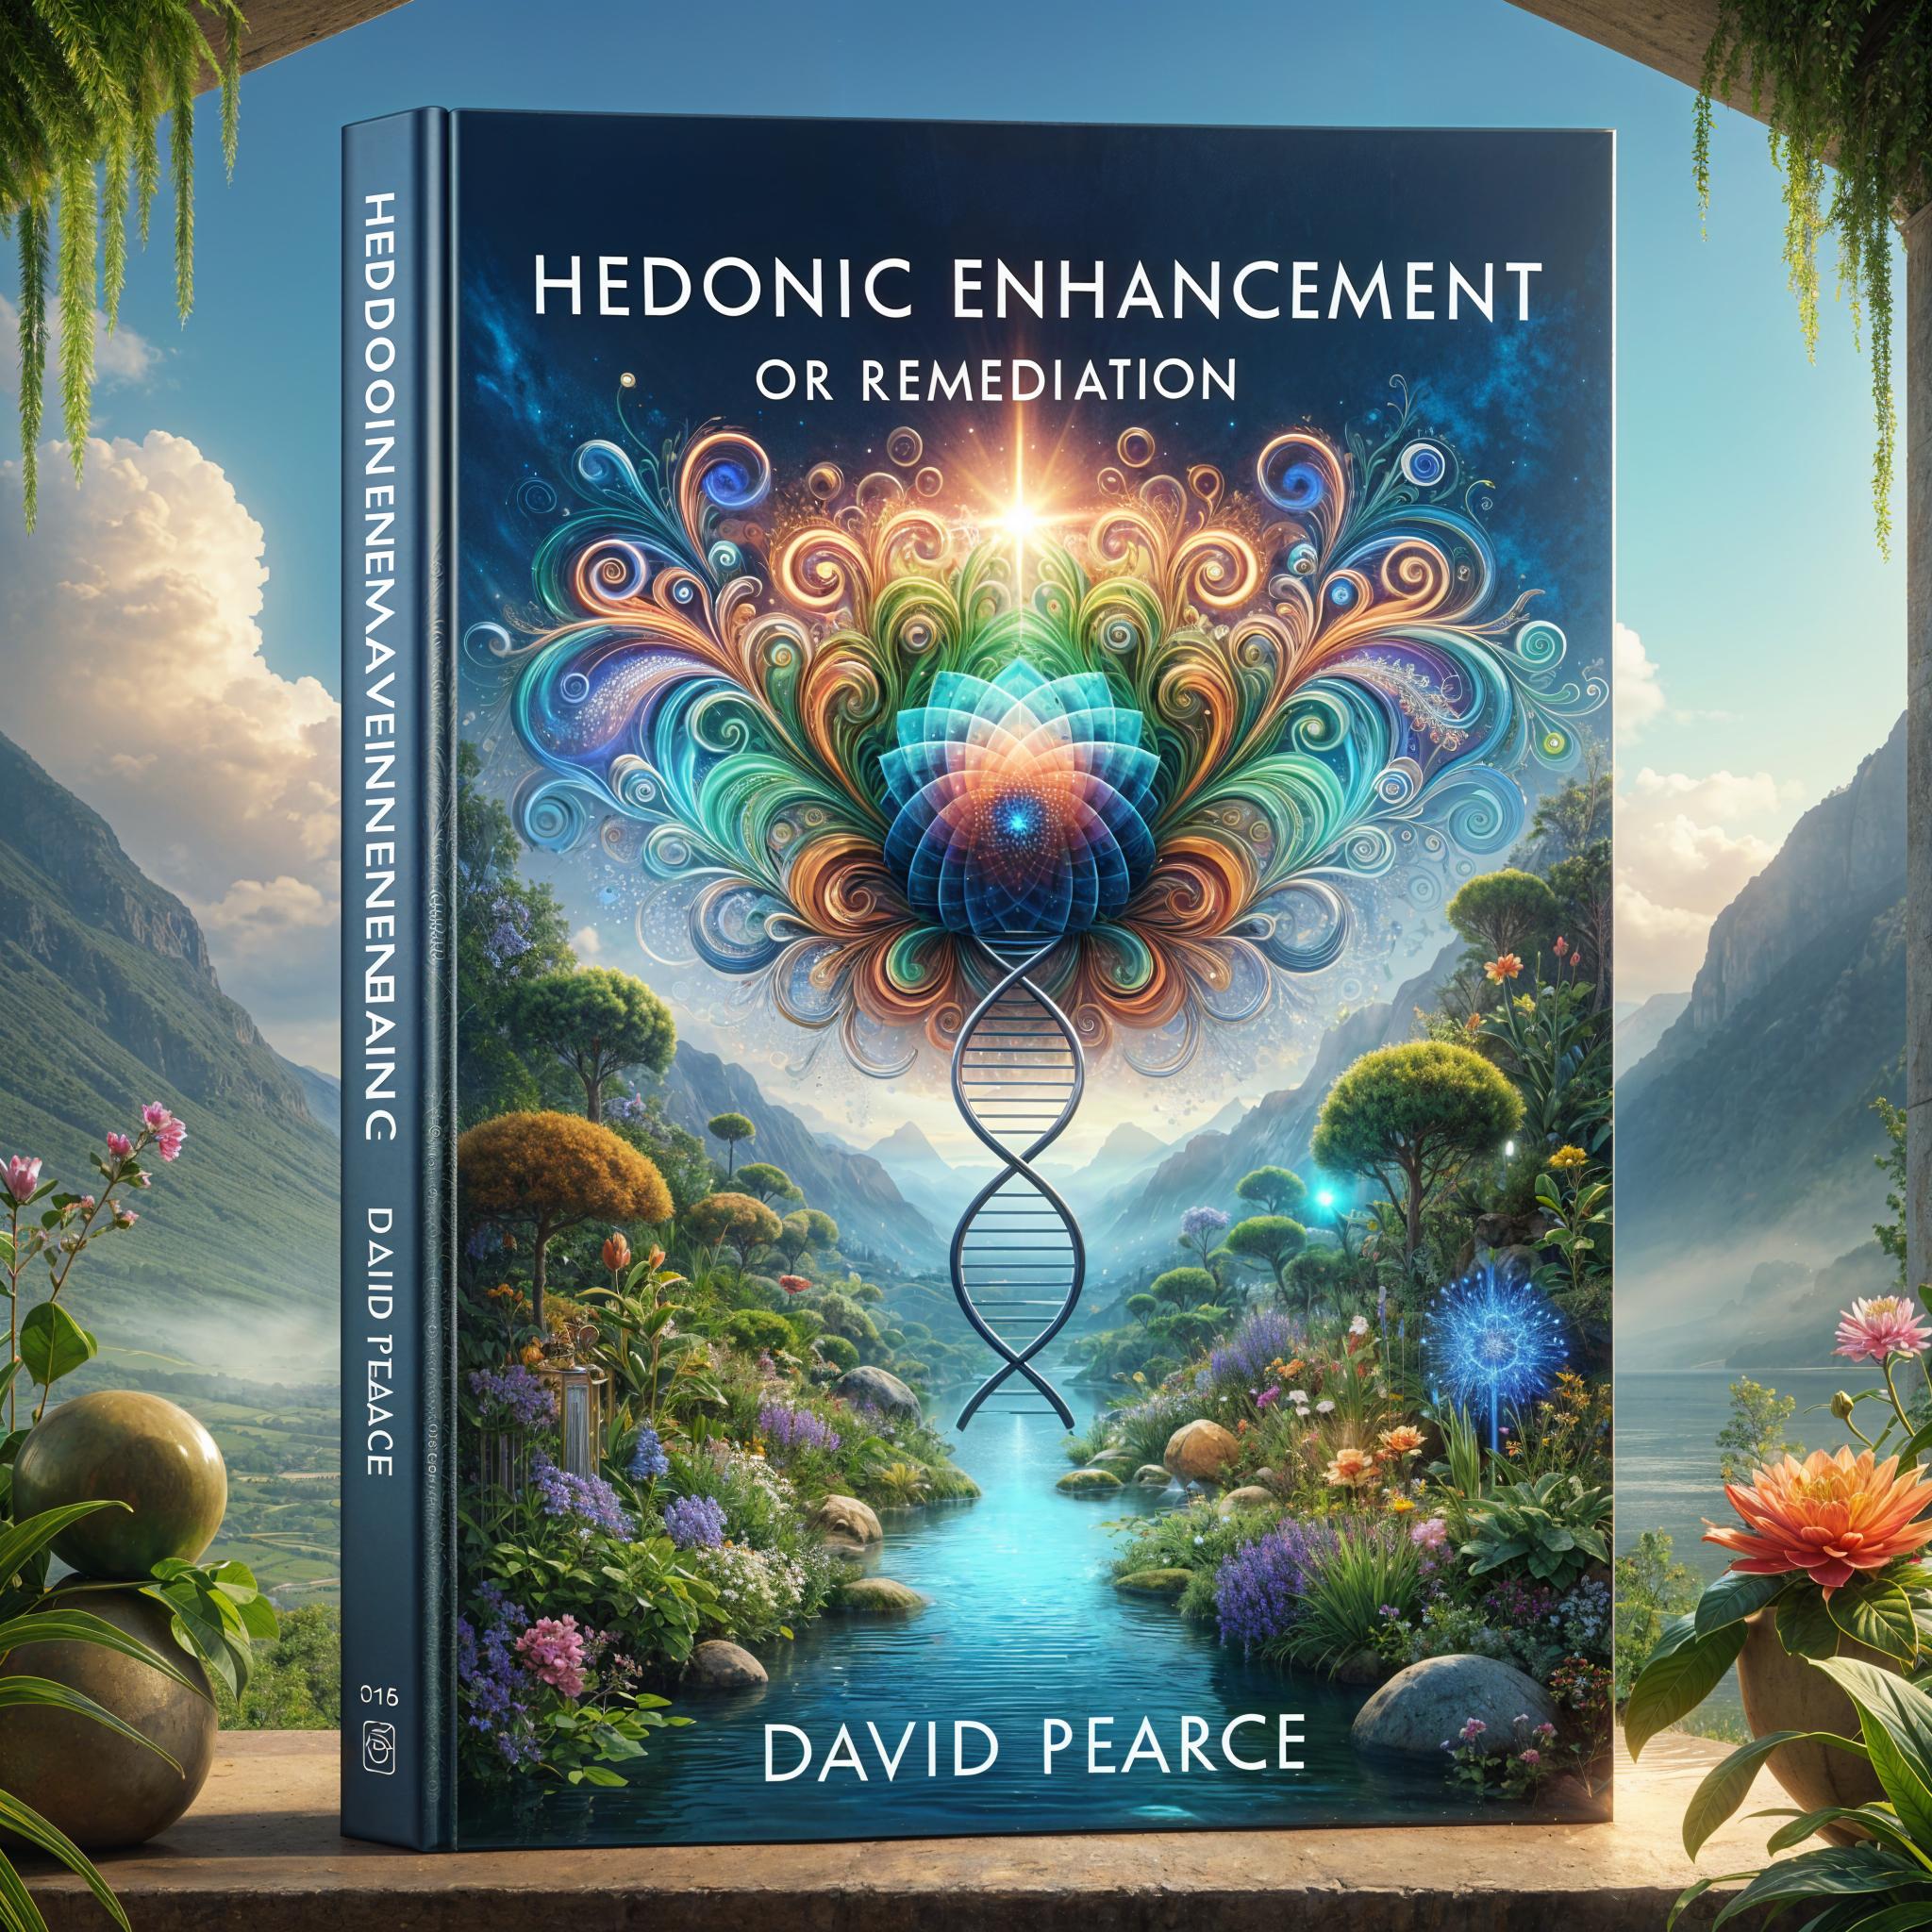 Hedonic Enhancement or Remediation by David Pearce